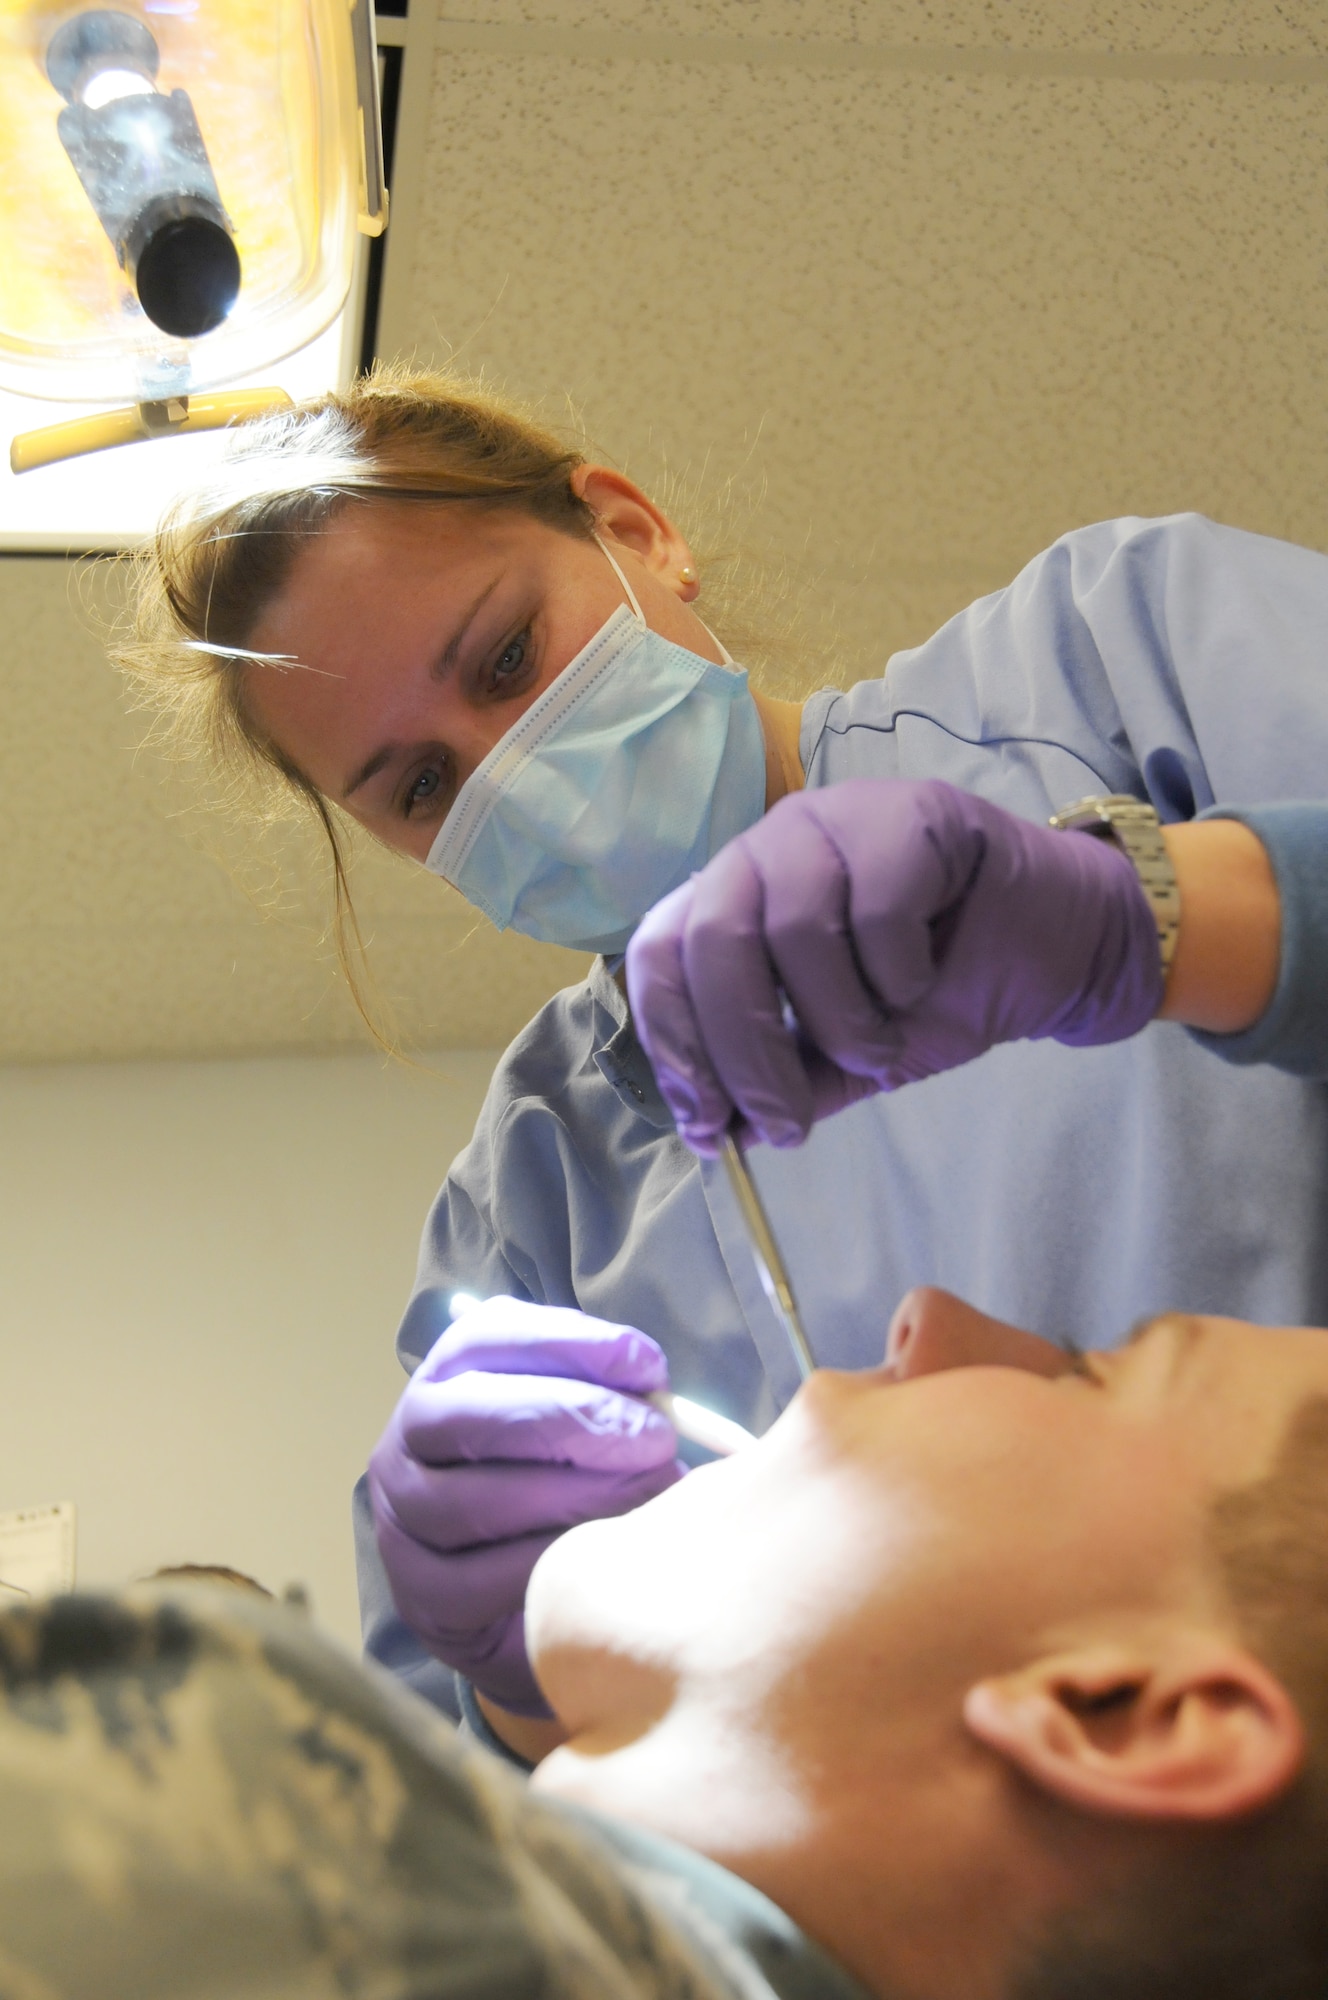 Ohio Air National Guard, Maj. Jennifer
Ludwig a dentist from the 180th Fighter
Wing Medical Group, examines a patient
for their annual dental check-ups January
8, 2011. Members from the 180th
Medical Group are preparing for a health
services inspection in April 2011.